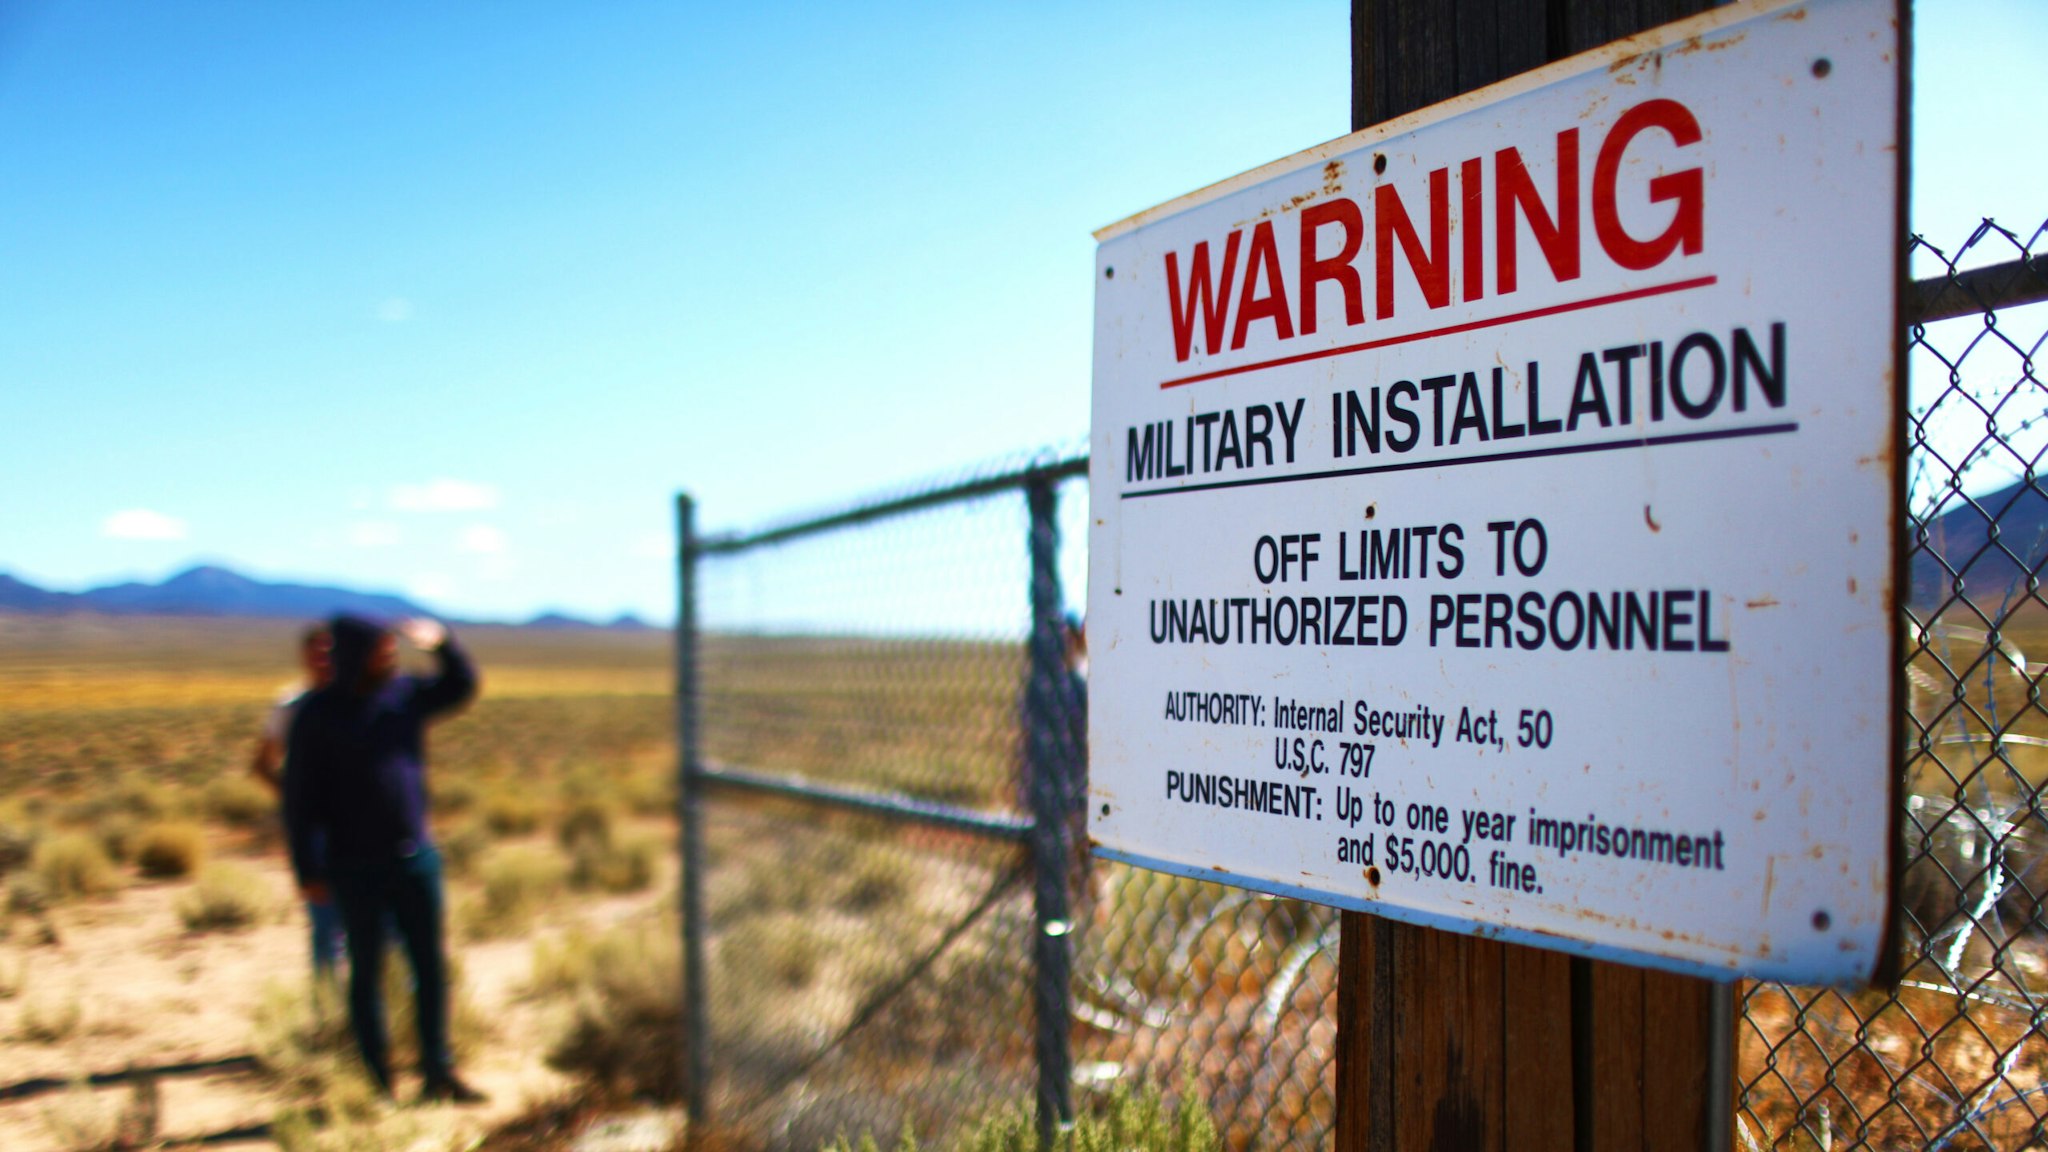 People gather at an entrance gate to the Nevada Test and Training Range, located near Area 51, on September 20, 2019 near Rachel, Nevada. People have gathered at the gate while in town attending 'Storm Area 51' spinoff events. The original Facebook event jokingly encouraged participants to charge the famously secretive Area 51 military base. The military has warned attendees not to approach the protected Area 51 military installation.